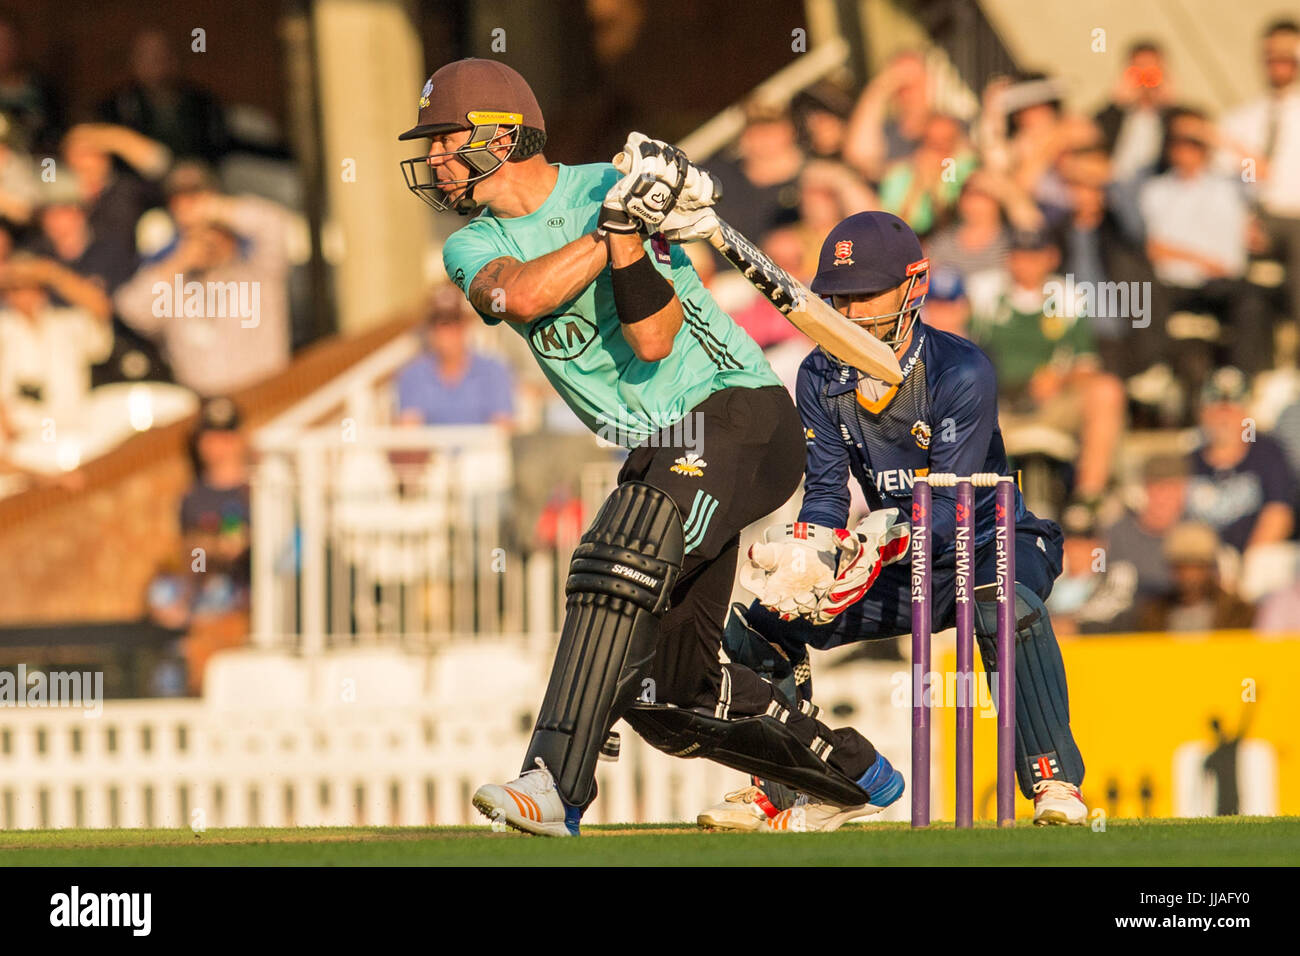 London, UK. 19th July, 2017. Kevin Pietersen batting for Surrey against Essex in the NatWest T20 Blast match at the Kia Oval. Credit: David Rowe/Alamy Live News Stock Photo